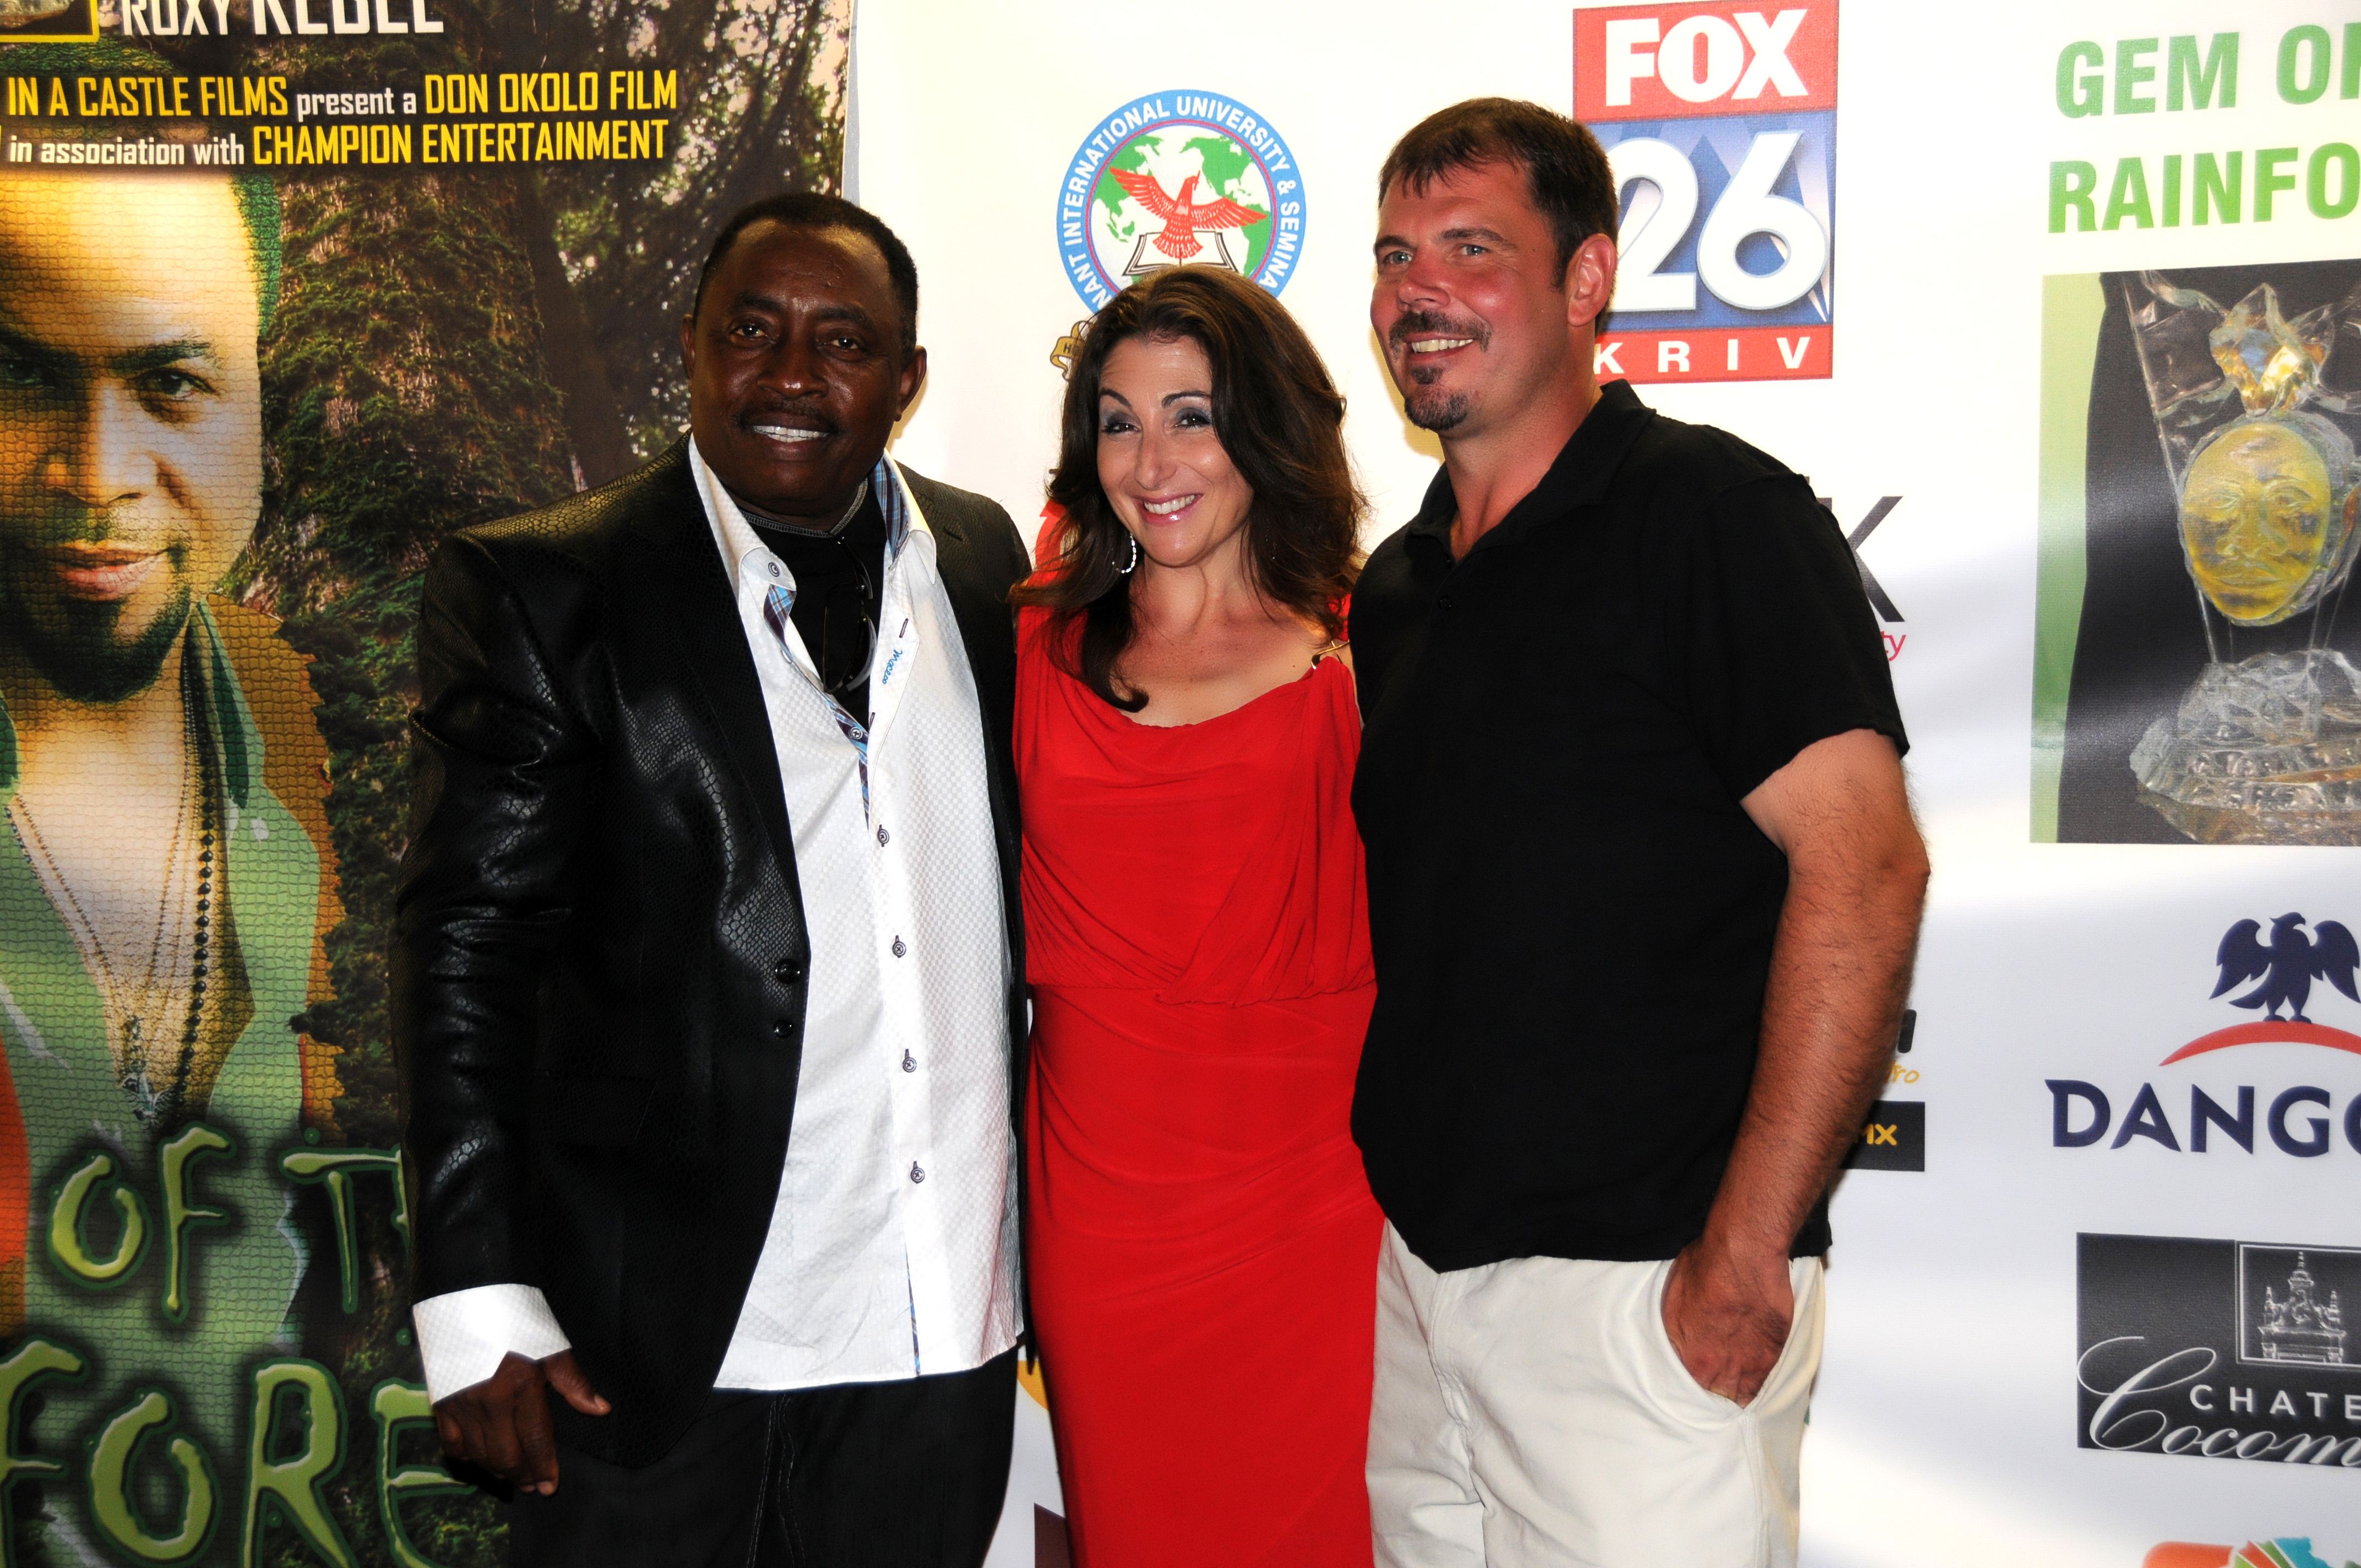 With Director Don Okolo and Brian Miskovich at 